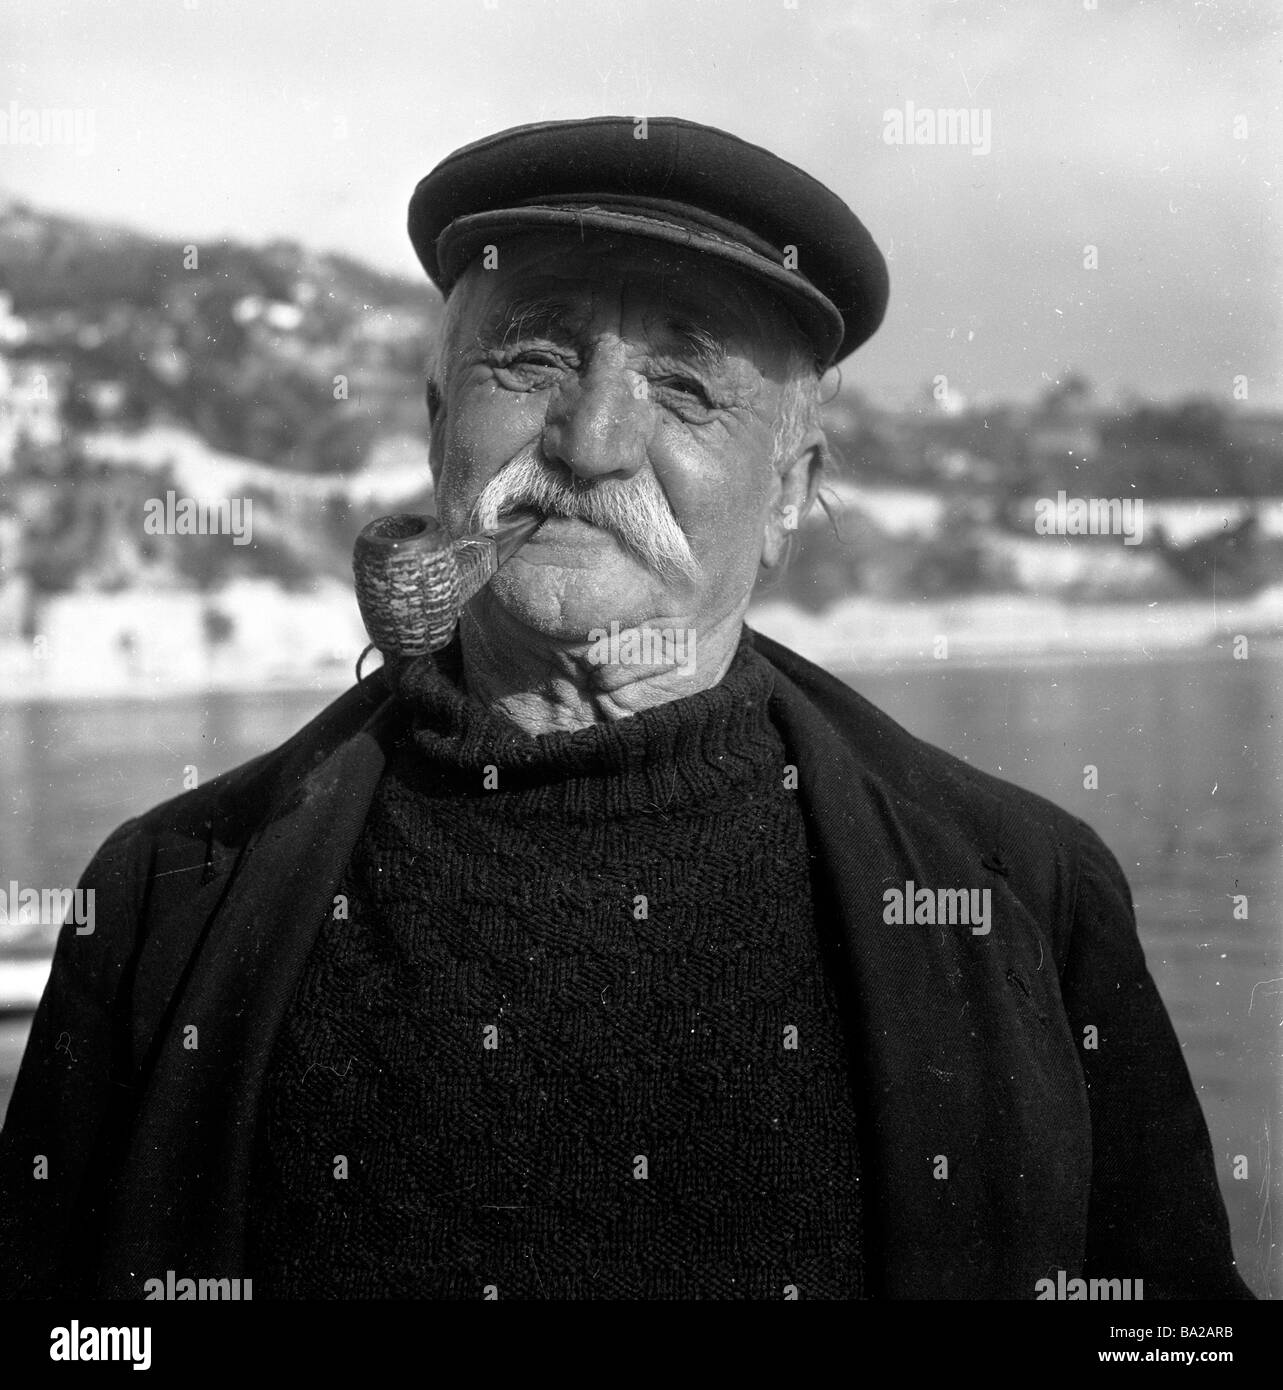 1950s, a portrait by J Allan Cash of a local fisherman in beret and with pipe, at the port of Villefranche-sur-Mer, on the French Riviera, France. Stock Photo